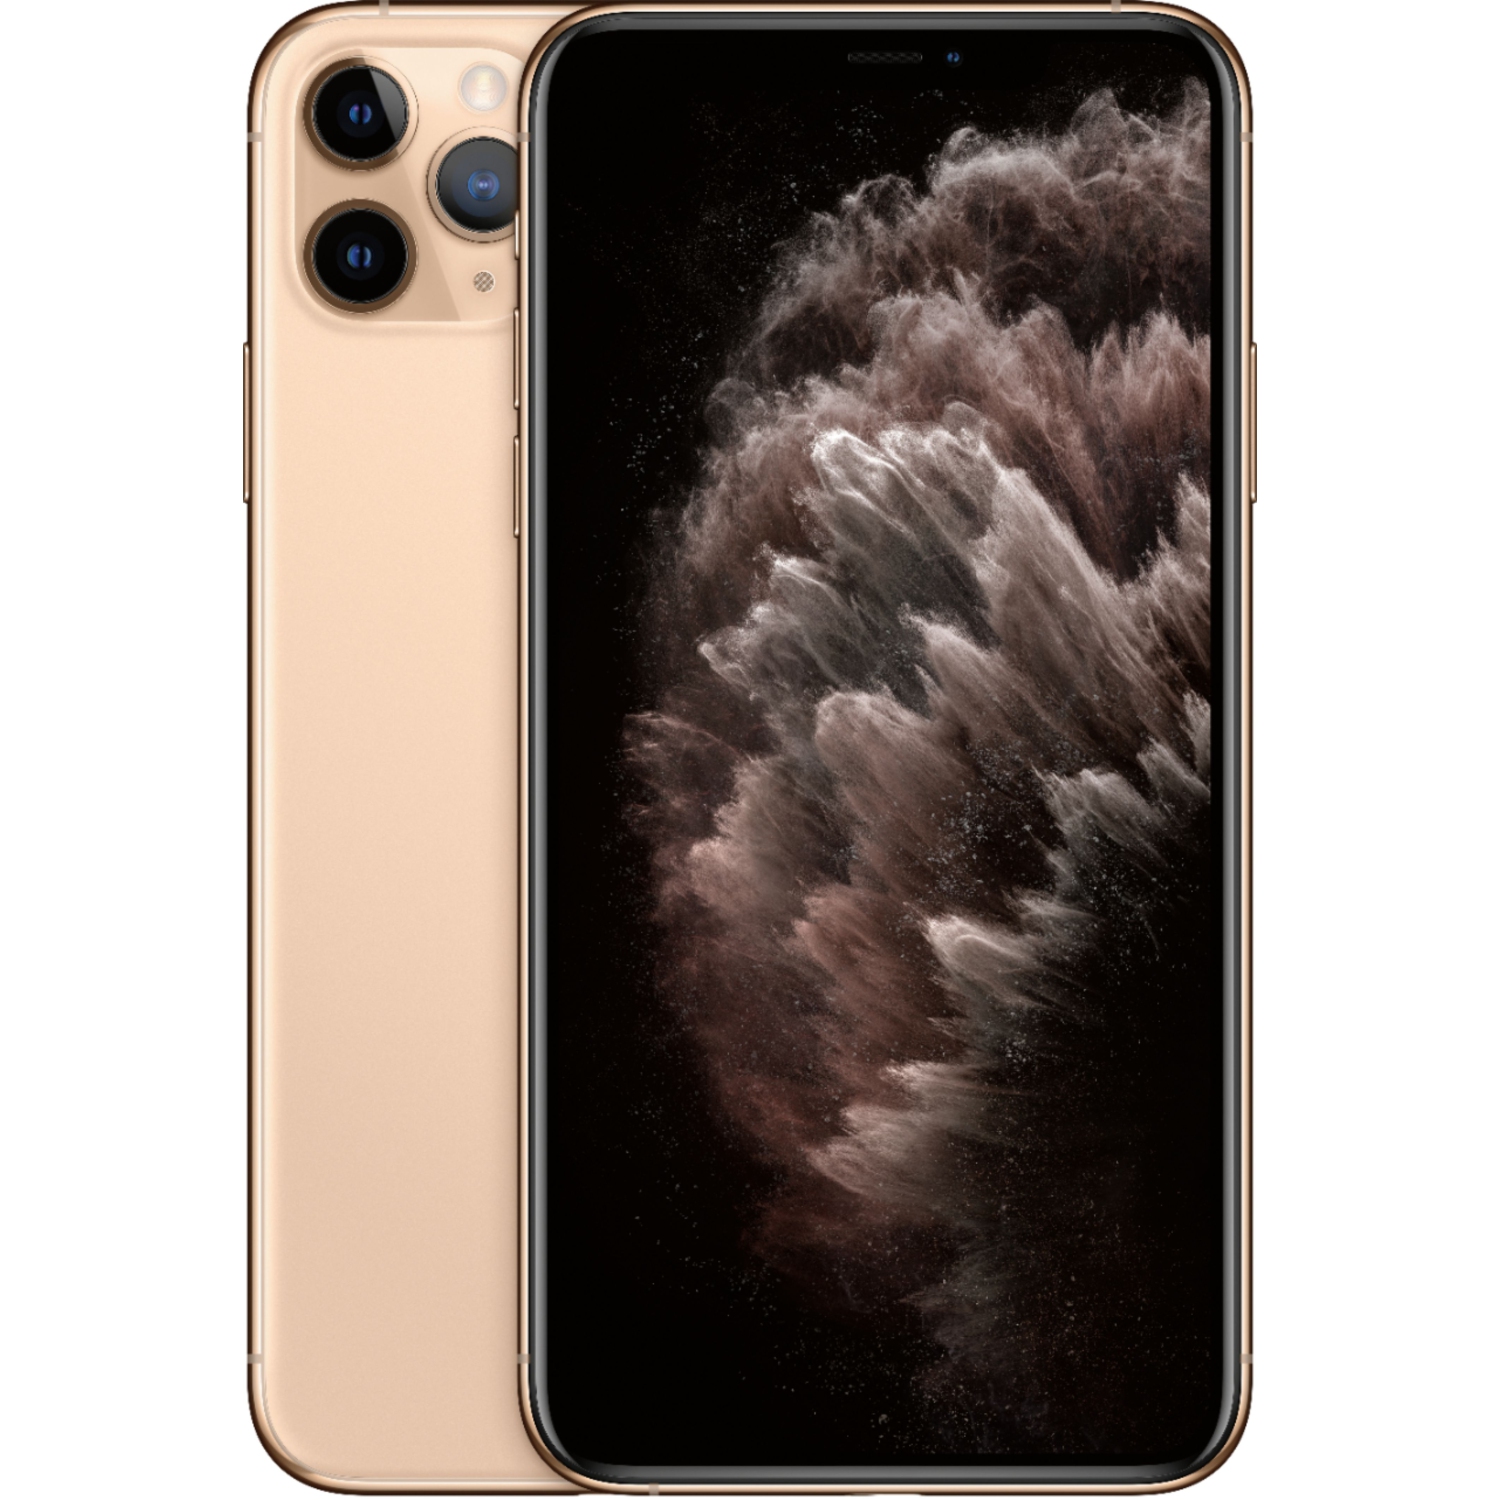 Refurbished (Excellent) - Apple iPhone 11 Pro Max 64GB Smartphone - Gold - Unlocked - Certified Refurbished